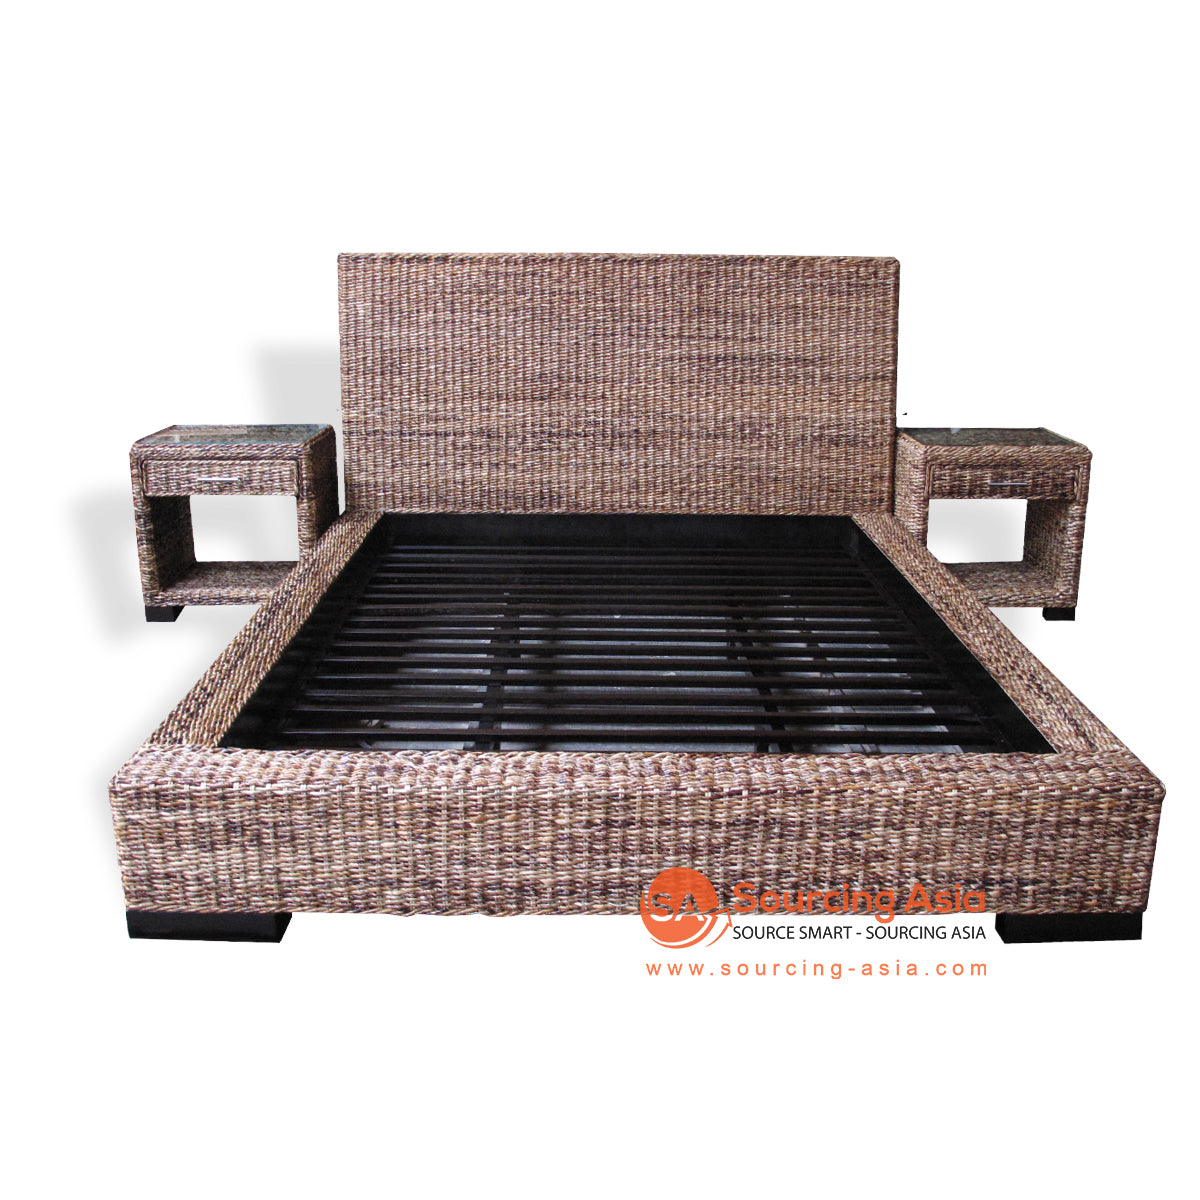 BDRT02K AND IMALSPJW001 BROWN WOVEN BANANA FIBER BED WITH MATCHING BEDSIDE TABLES